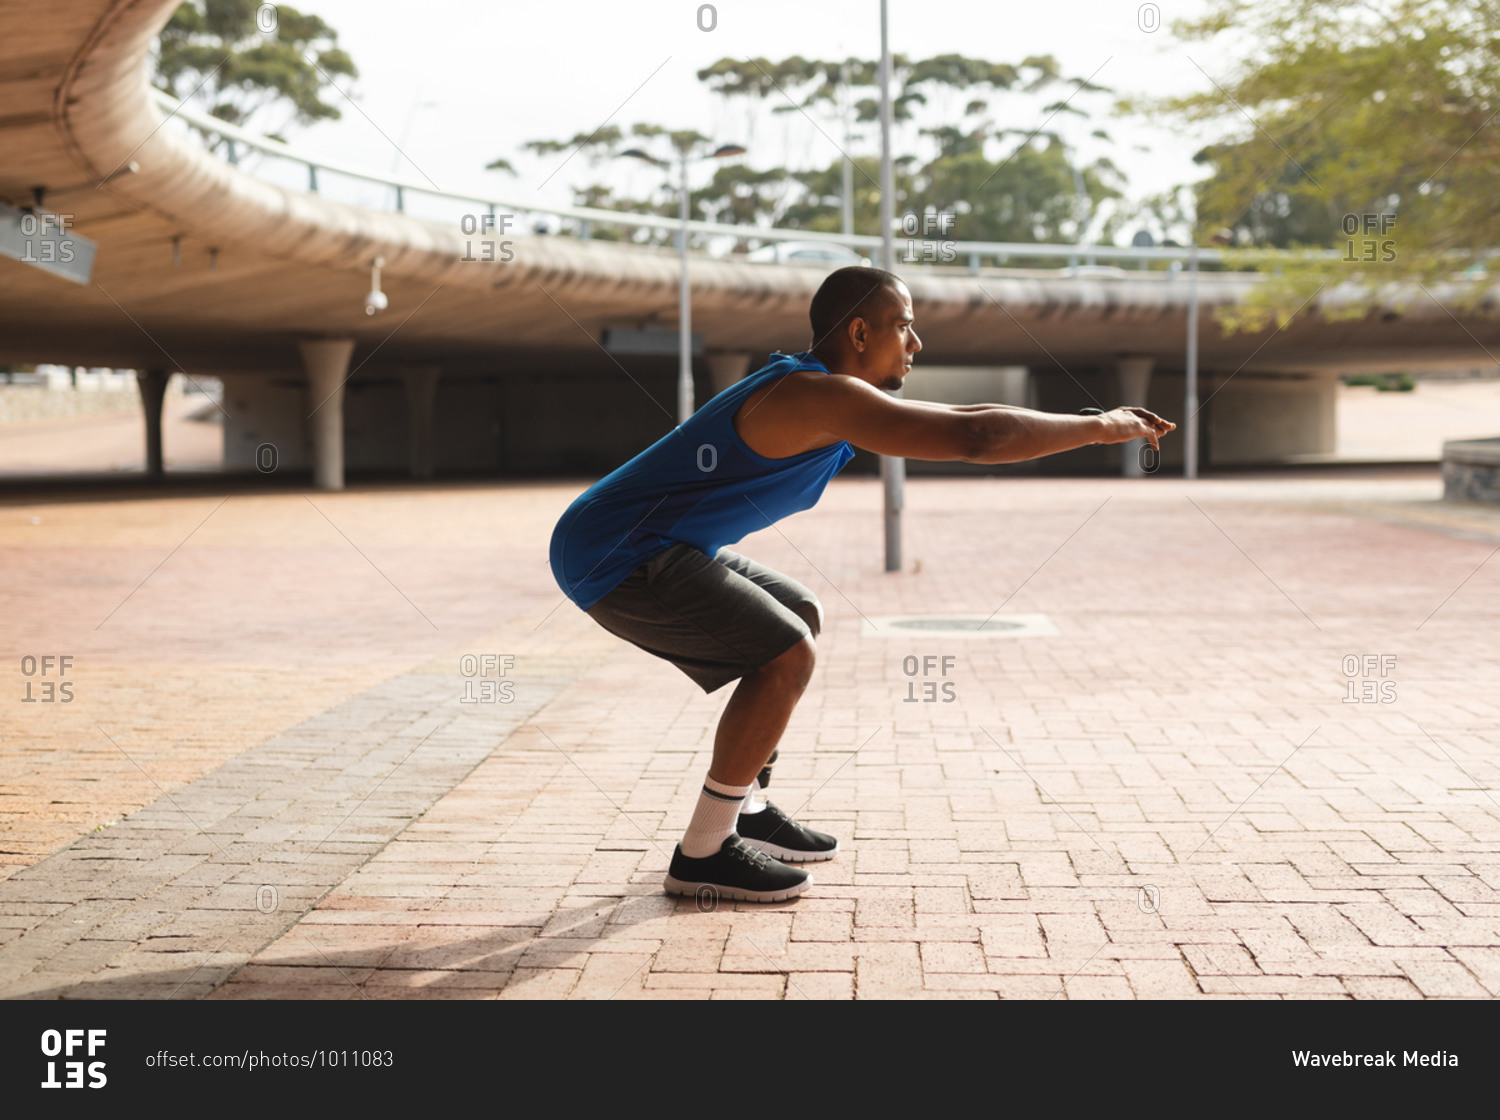 Disabled mixed race man with a prosthetic leg, working out in an urban park, leaning against wall, stretching his leg. Fitness disability healthy lifestyle.